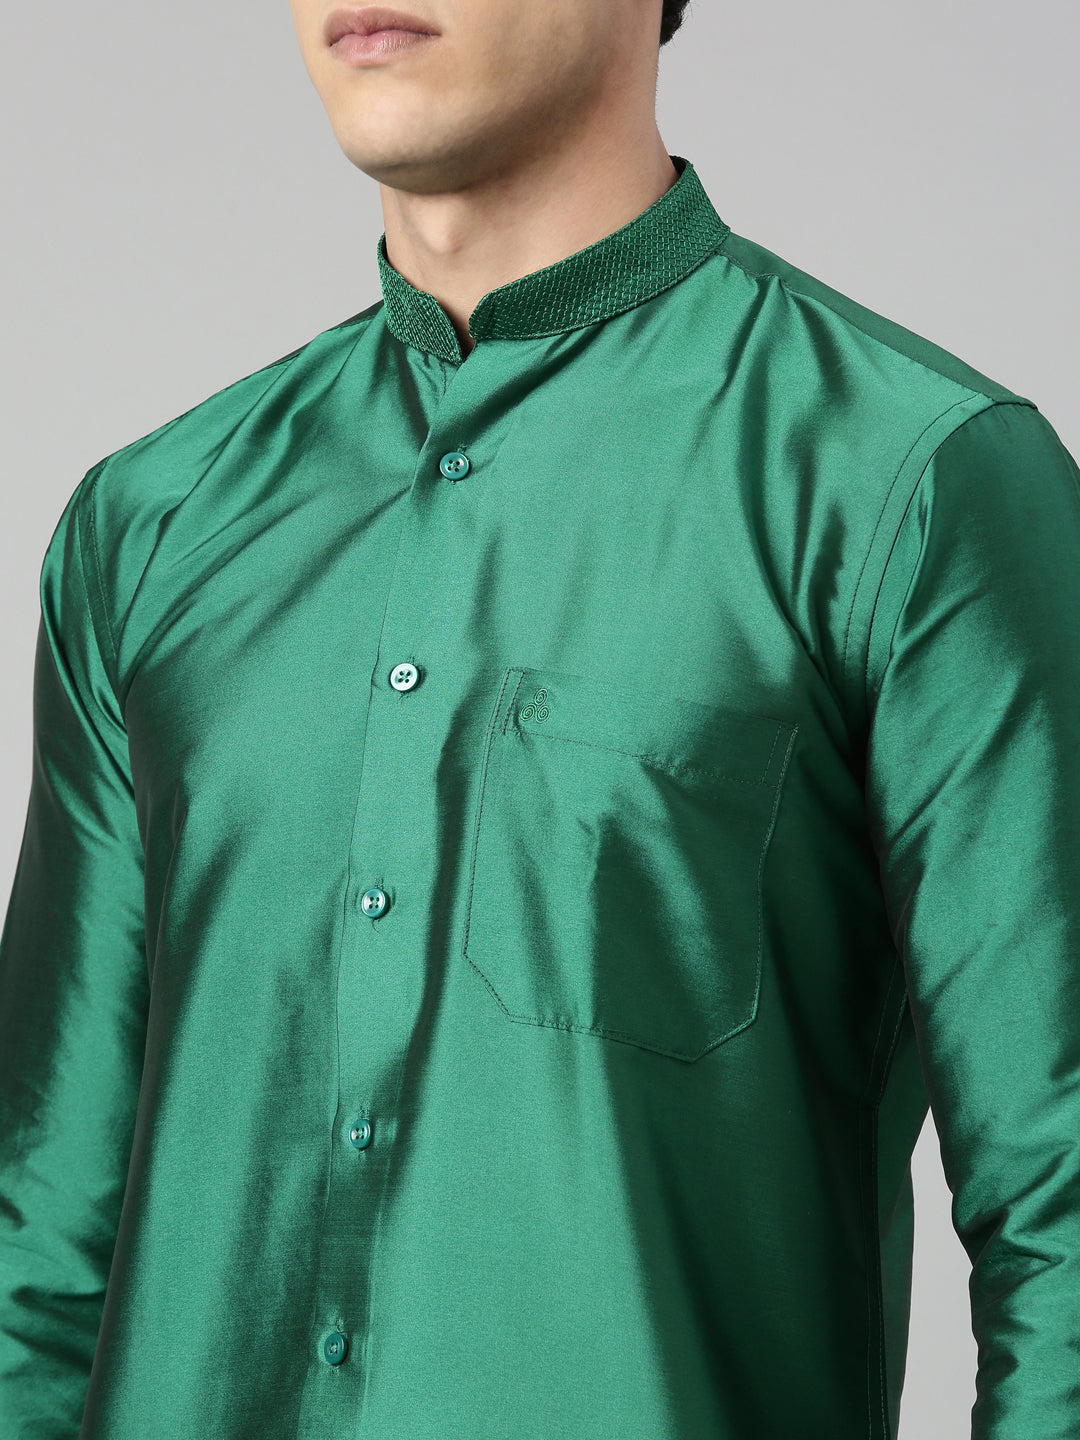 Green Color Art Silk Slim Fit Solid Party Shirt